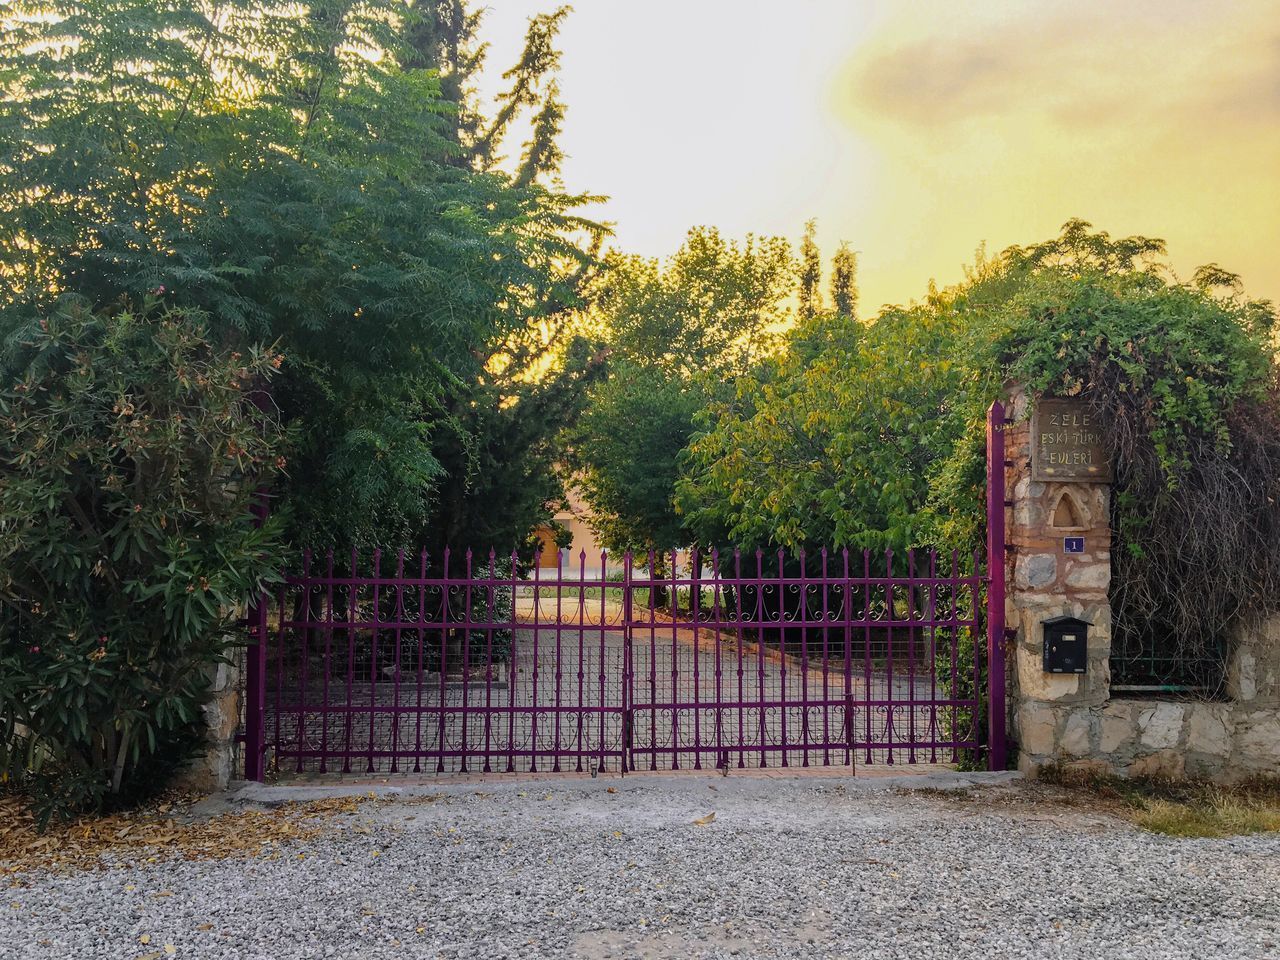 VIEW OF CLOSED GATE